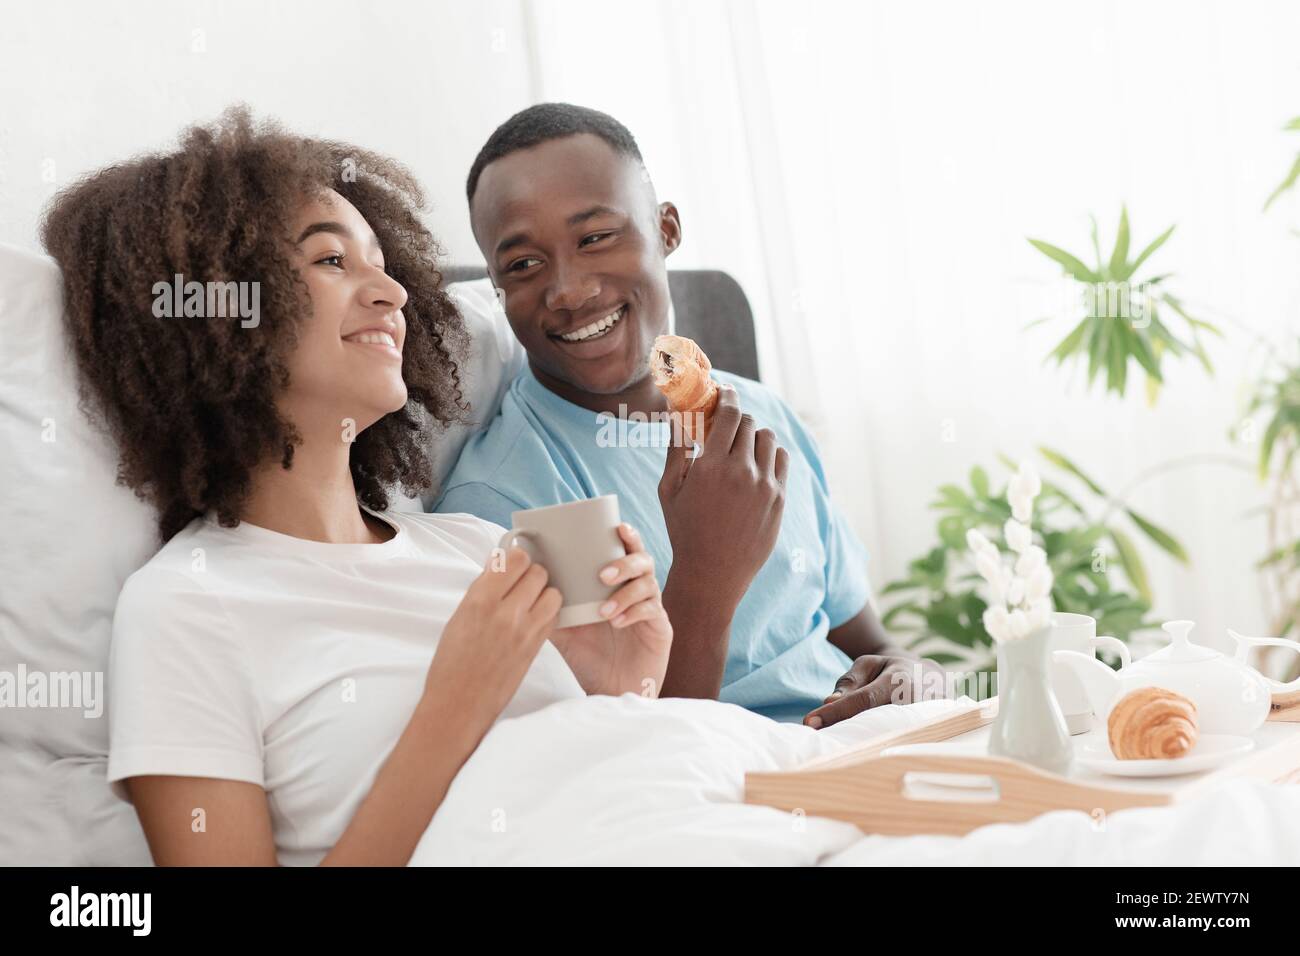 Breakfast in bed together at morning and good mood during covid-19 quarantine Stock Photo